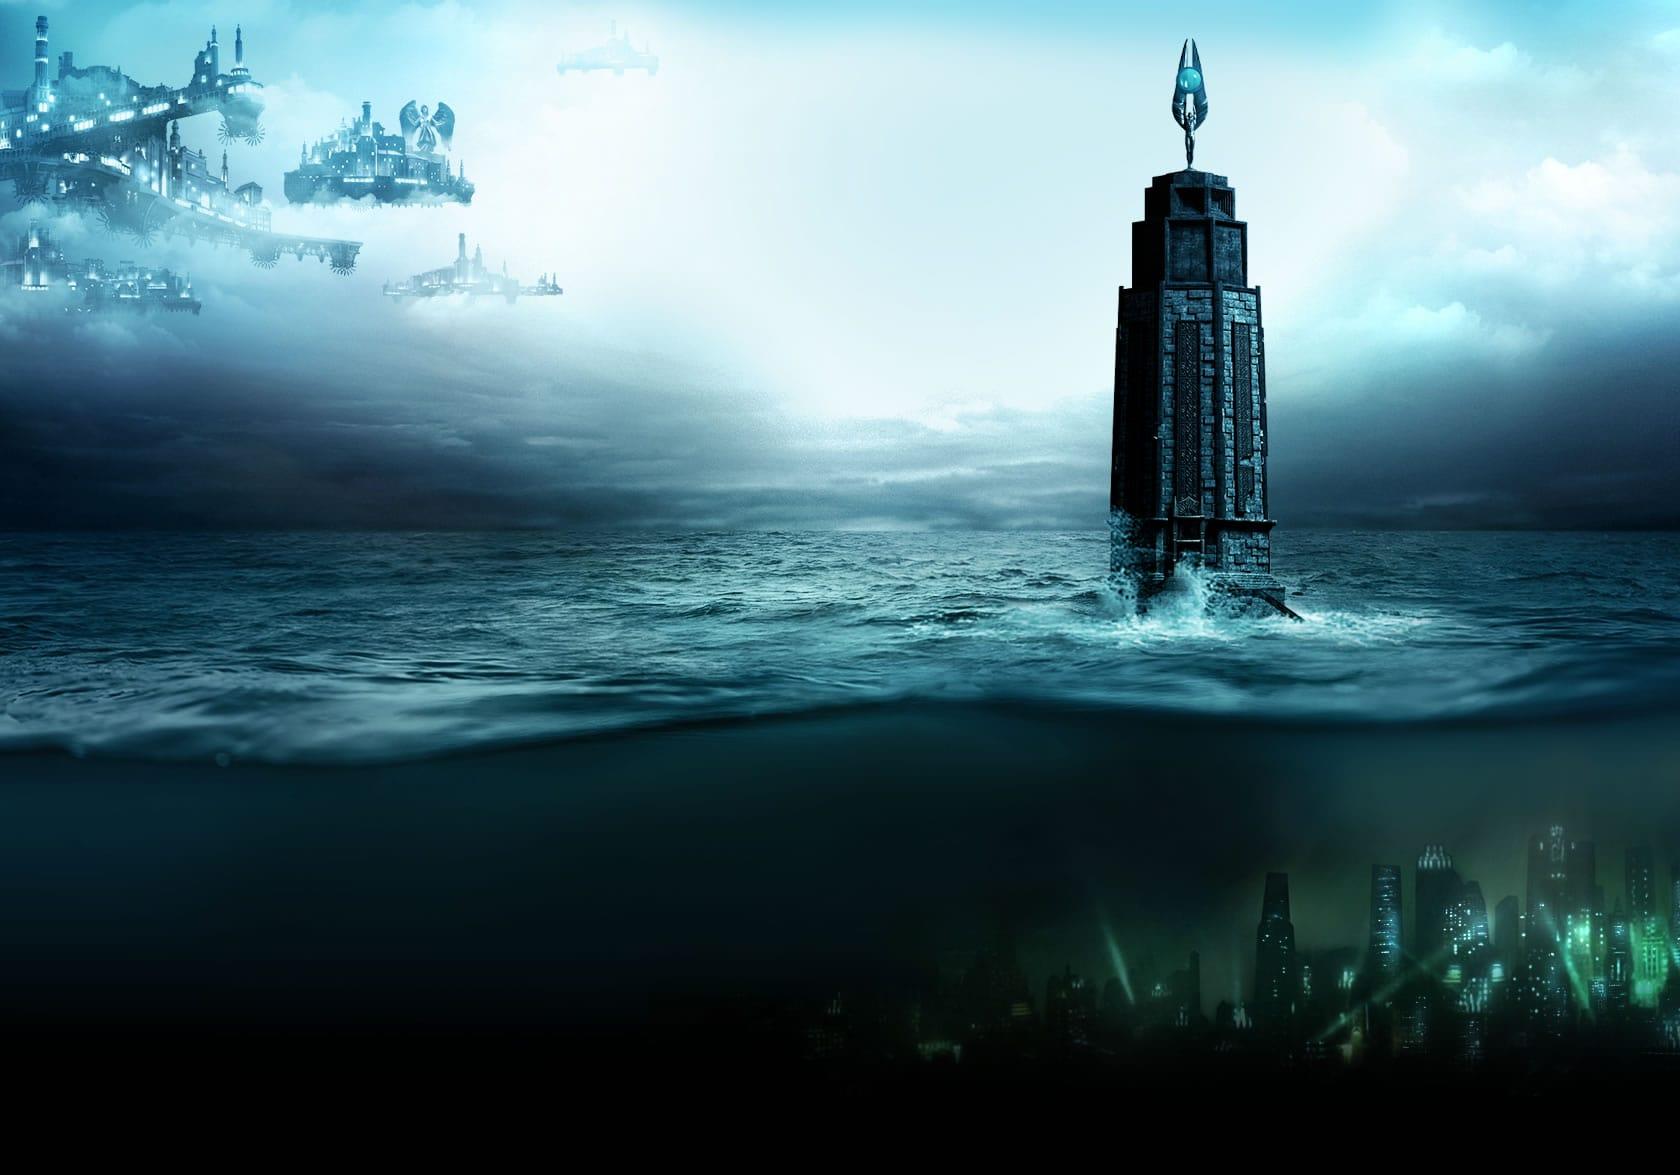 BioShock: The Collection Wallpapers - Wallpaper Cave